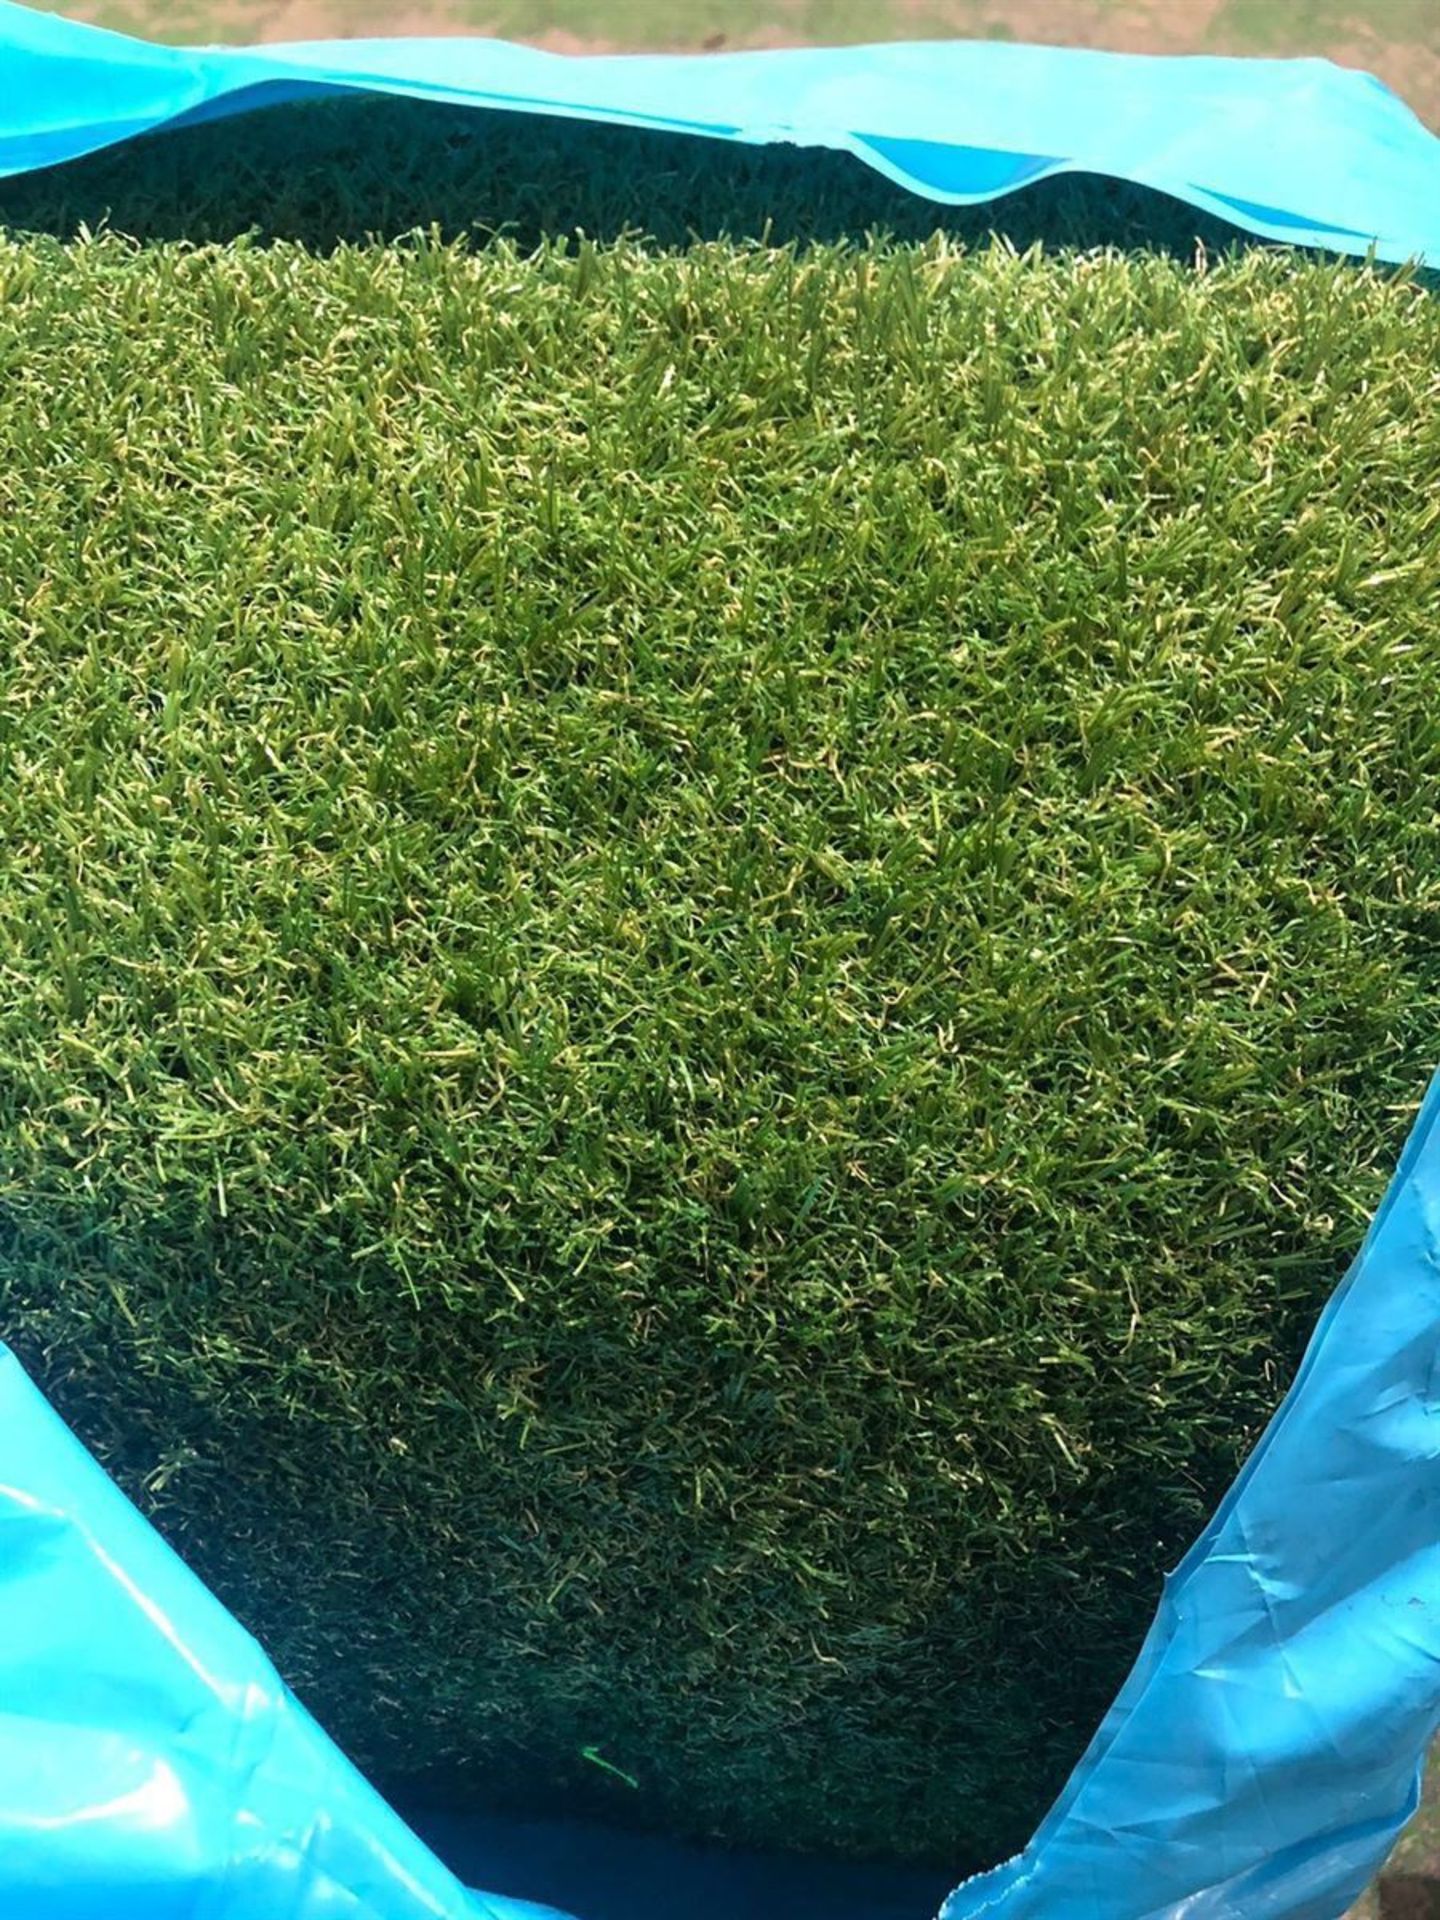 25m x 4m total 100m2 Heavy Duty G5 35mm on a 2mm Width Artificial Grass - Image 2 of 3